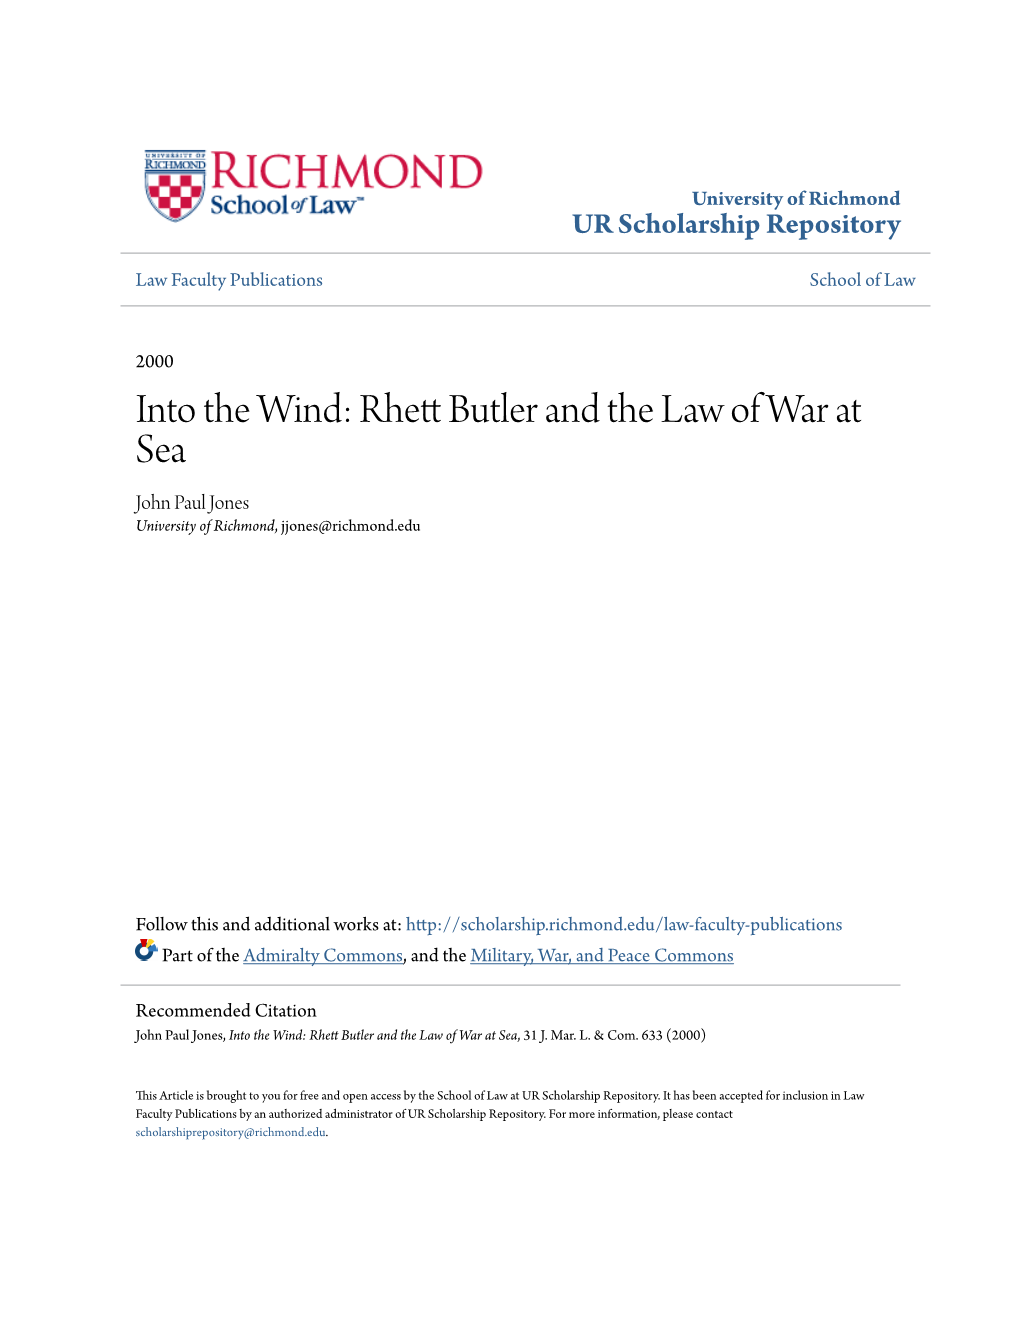 Rhett Butler and the Law of War at Sea